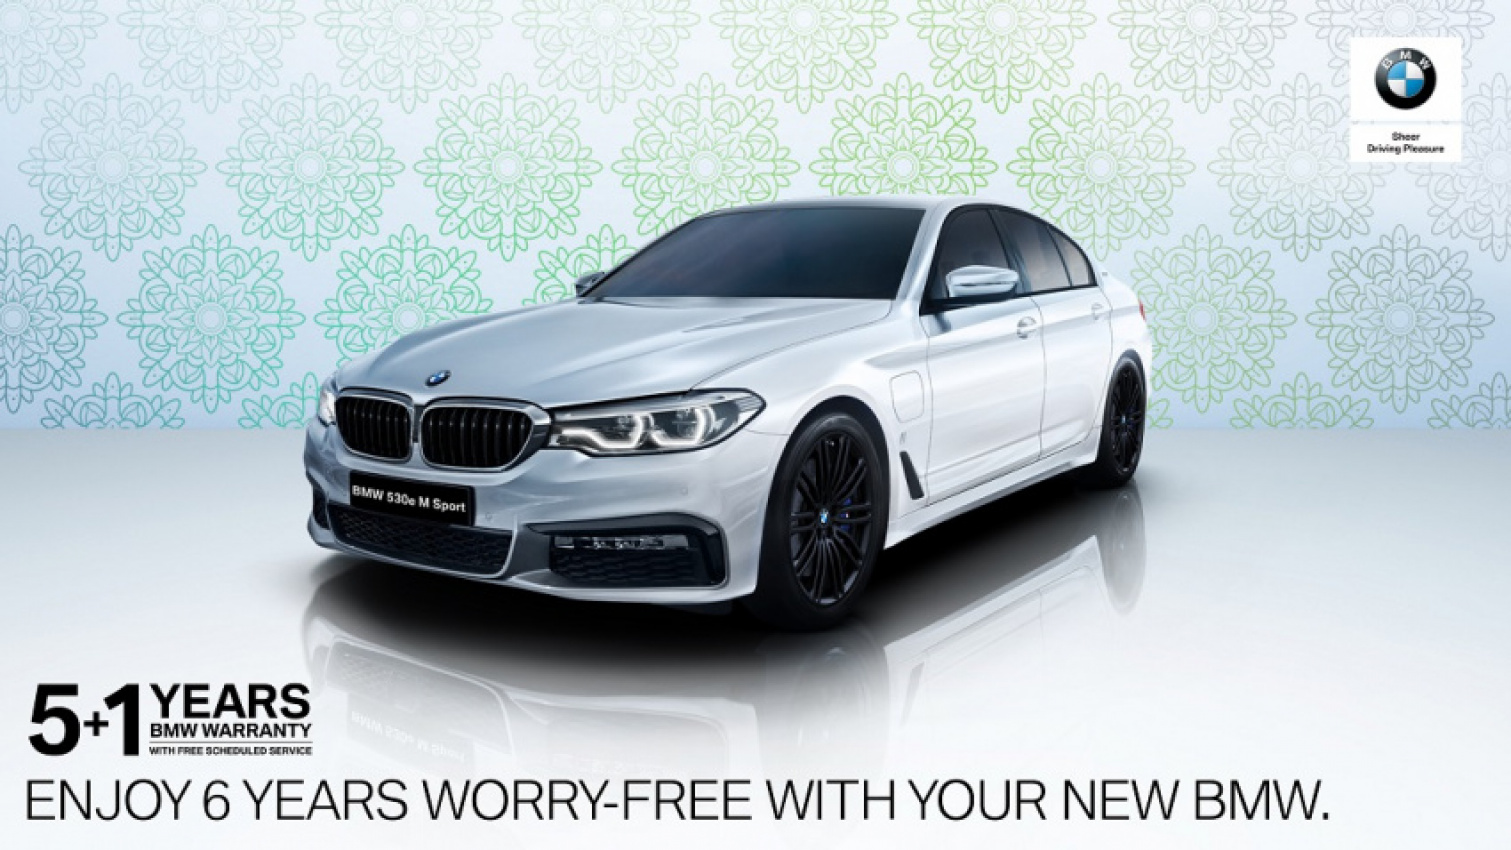 autos, bmw, car brands, cars, mini, automotive, bmw malaysia, chargev, charging station, iperformance, malaysia, mini malaysia, plug in hybrid, promotion, sedan, warranty, limited time offer: one year extension to service & repair for new bmw & mini vehicles in malaysia